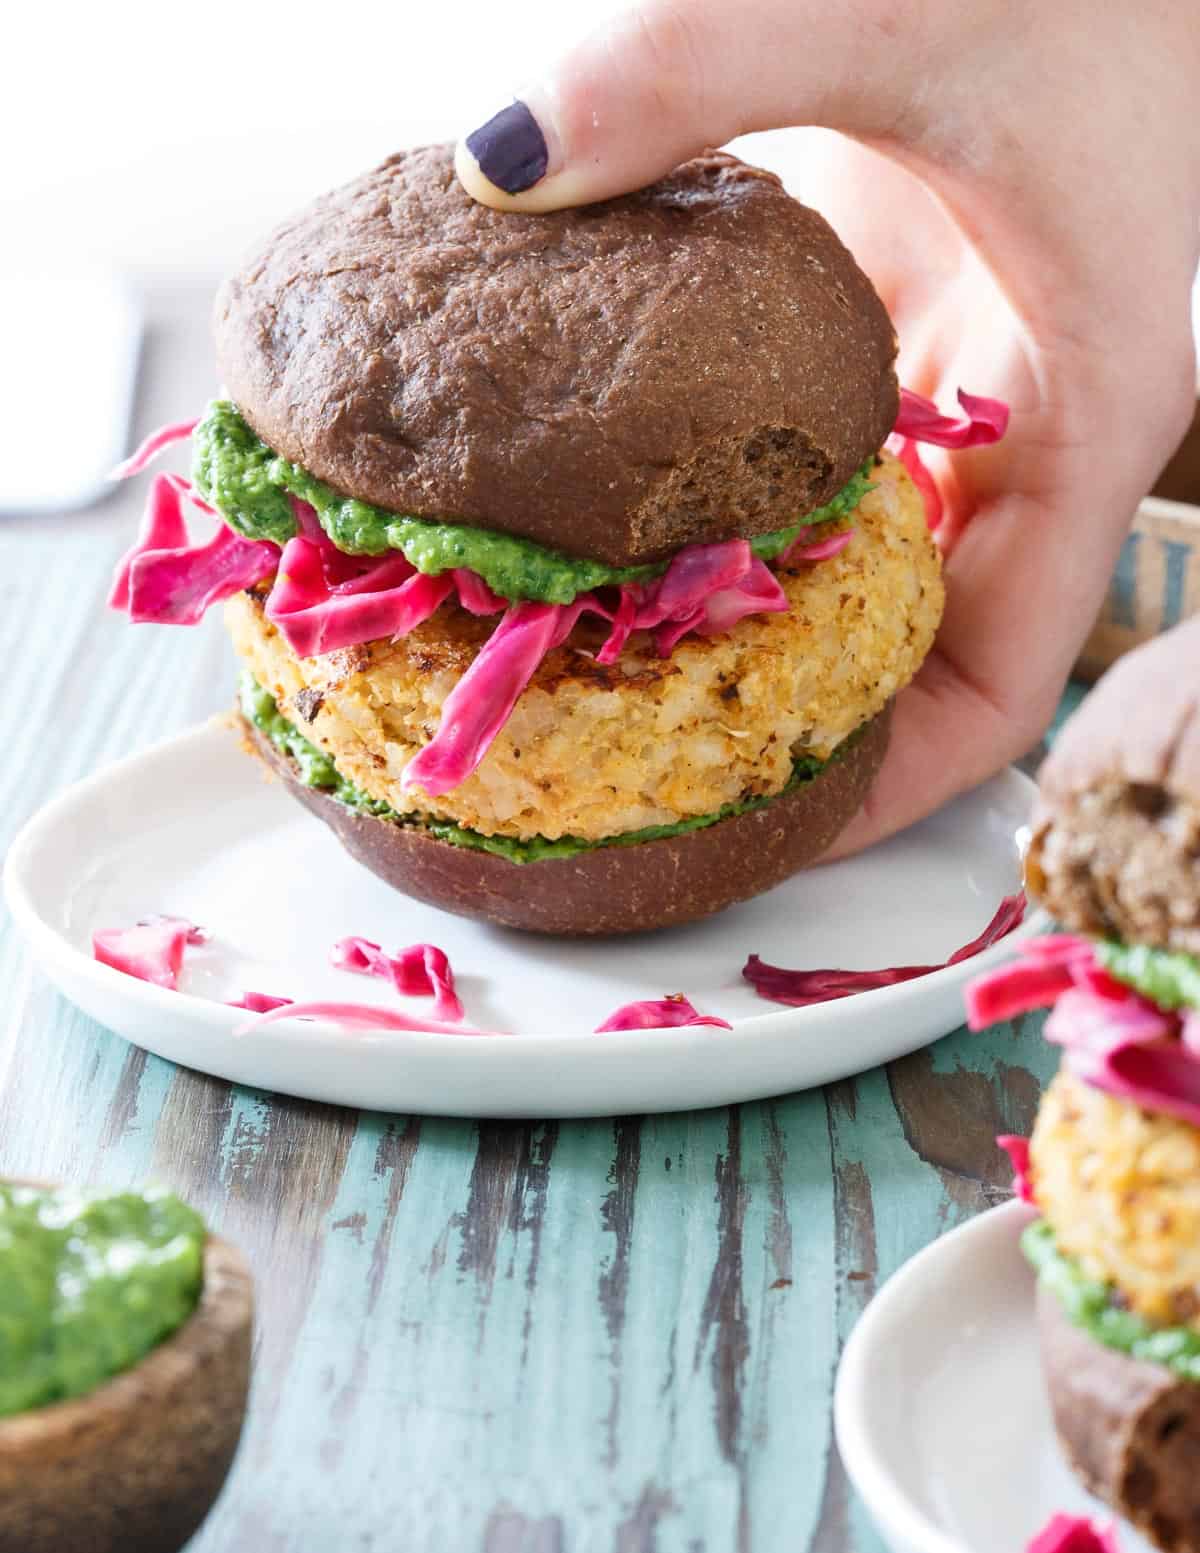 These Cheddar Cauliflower Burgers are a delicious spin on a vegetarian burger with pickled cabbage and a refreshing cilantro pesto.